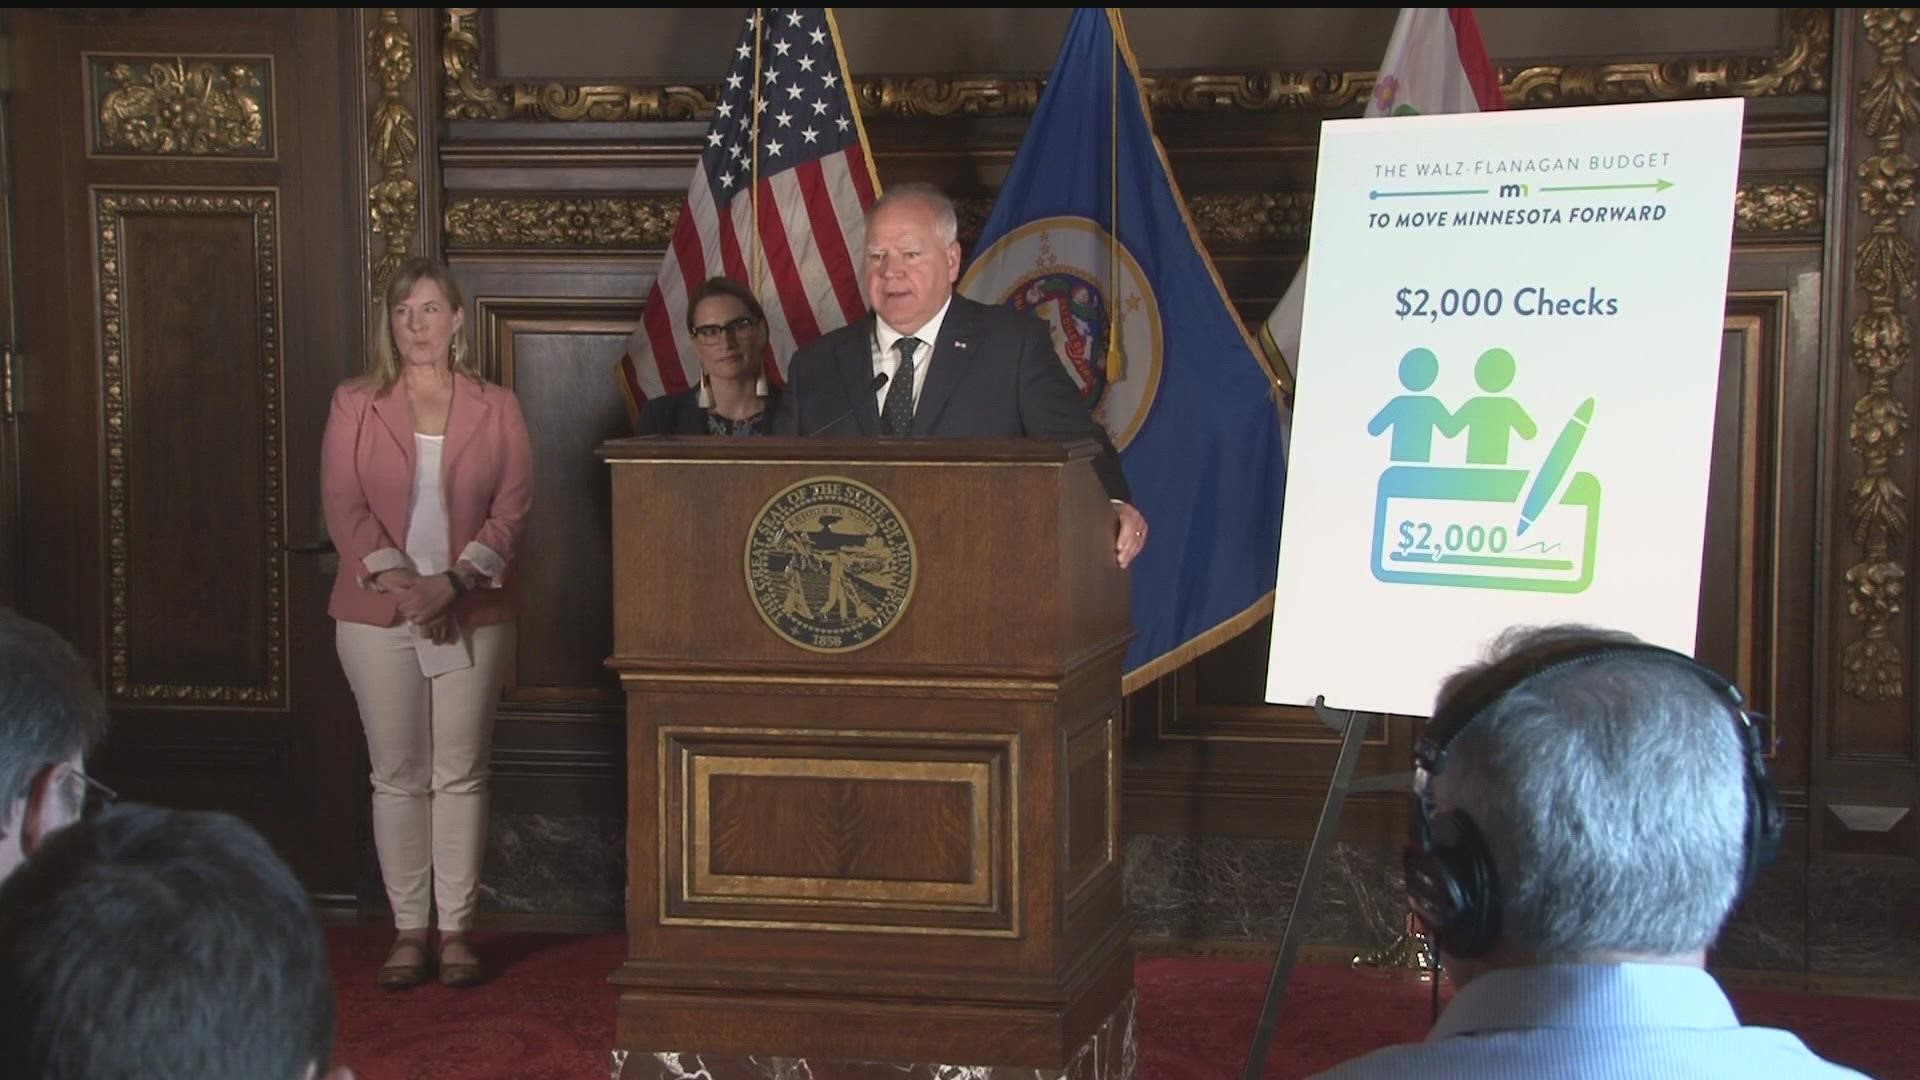 House Speaker Melissa Hortman was on hand for Walz's new plan which calls for $2,000 to joint filers, and $1,000 to single filers.